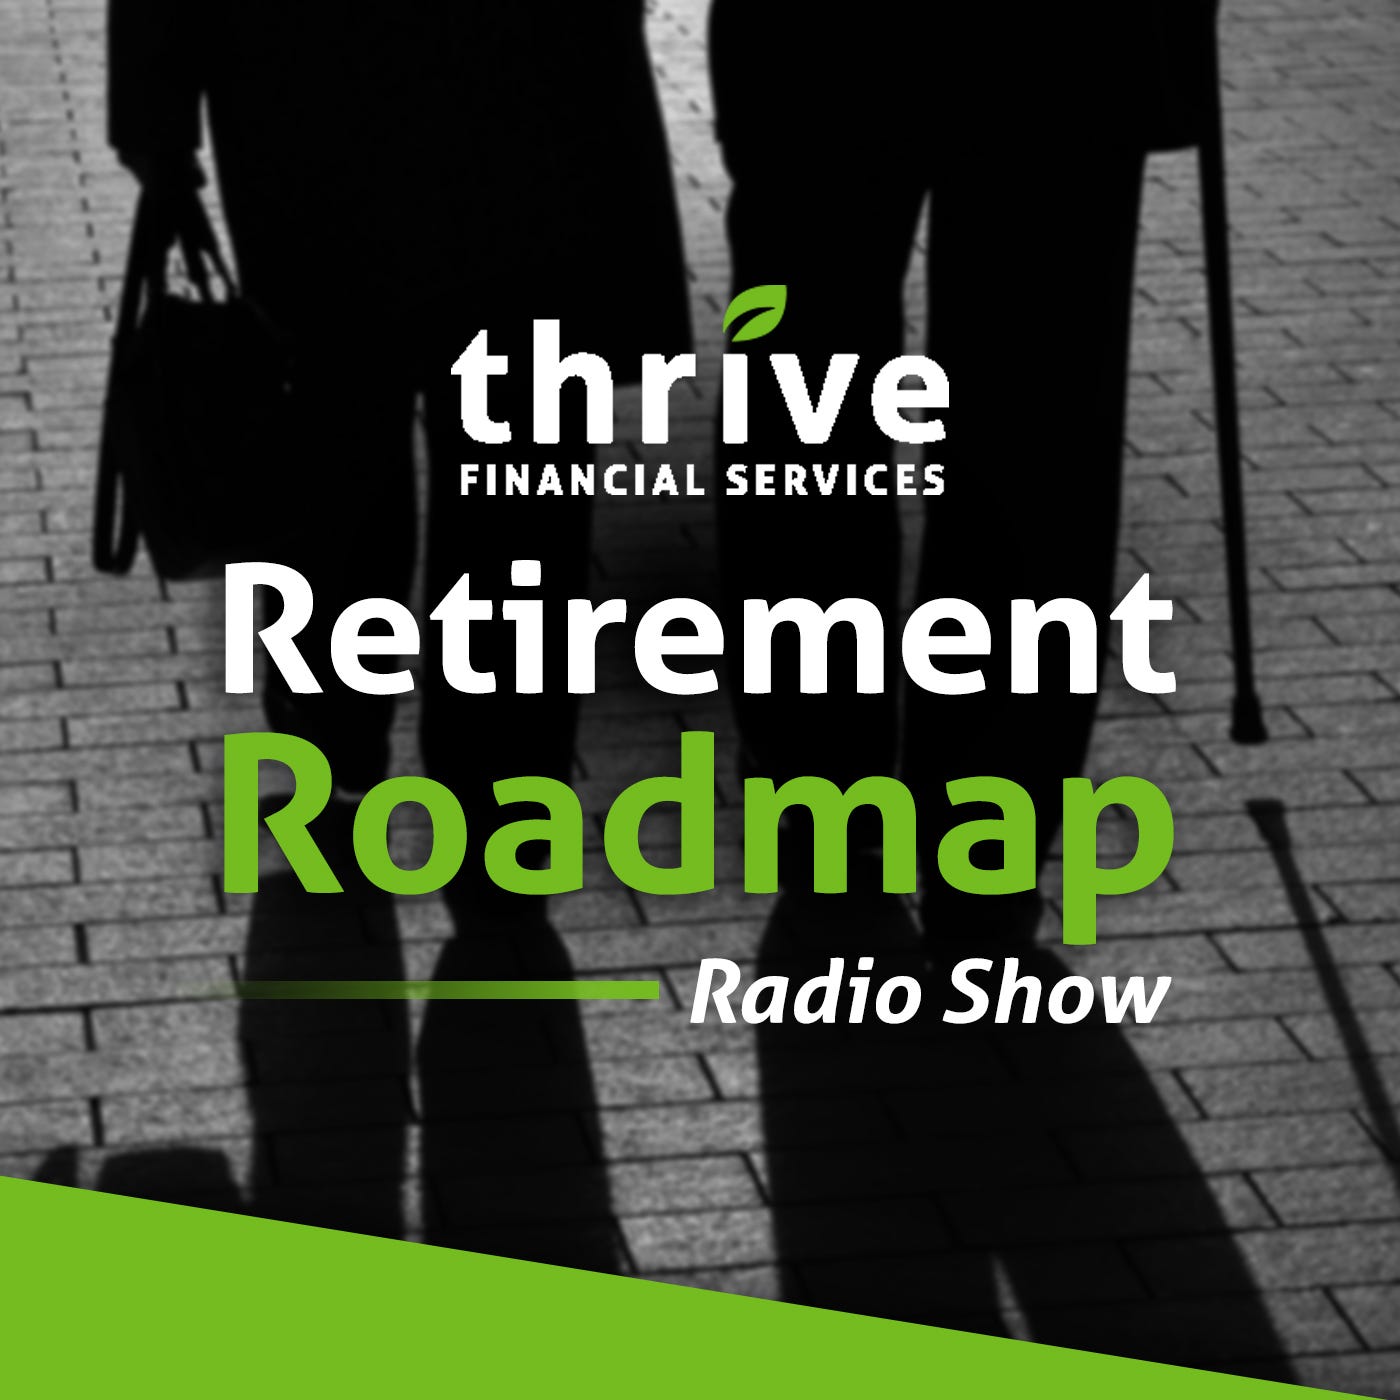 July 4, 2020 | Thrive Financial